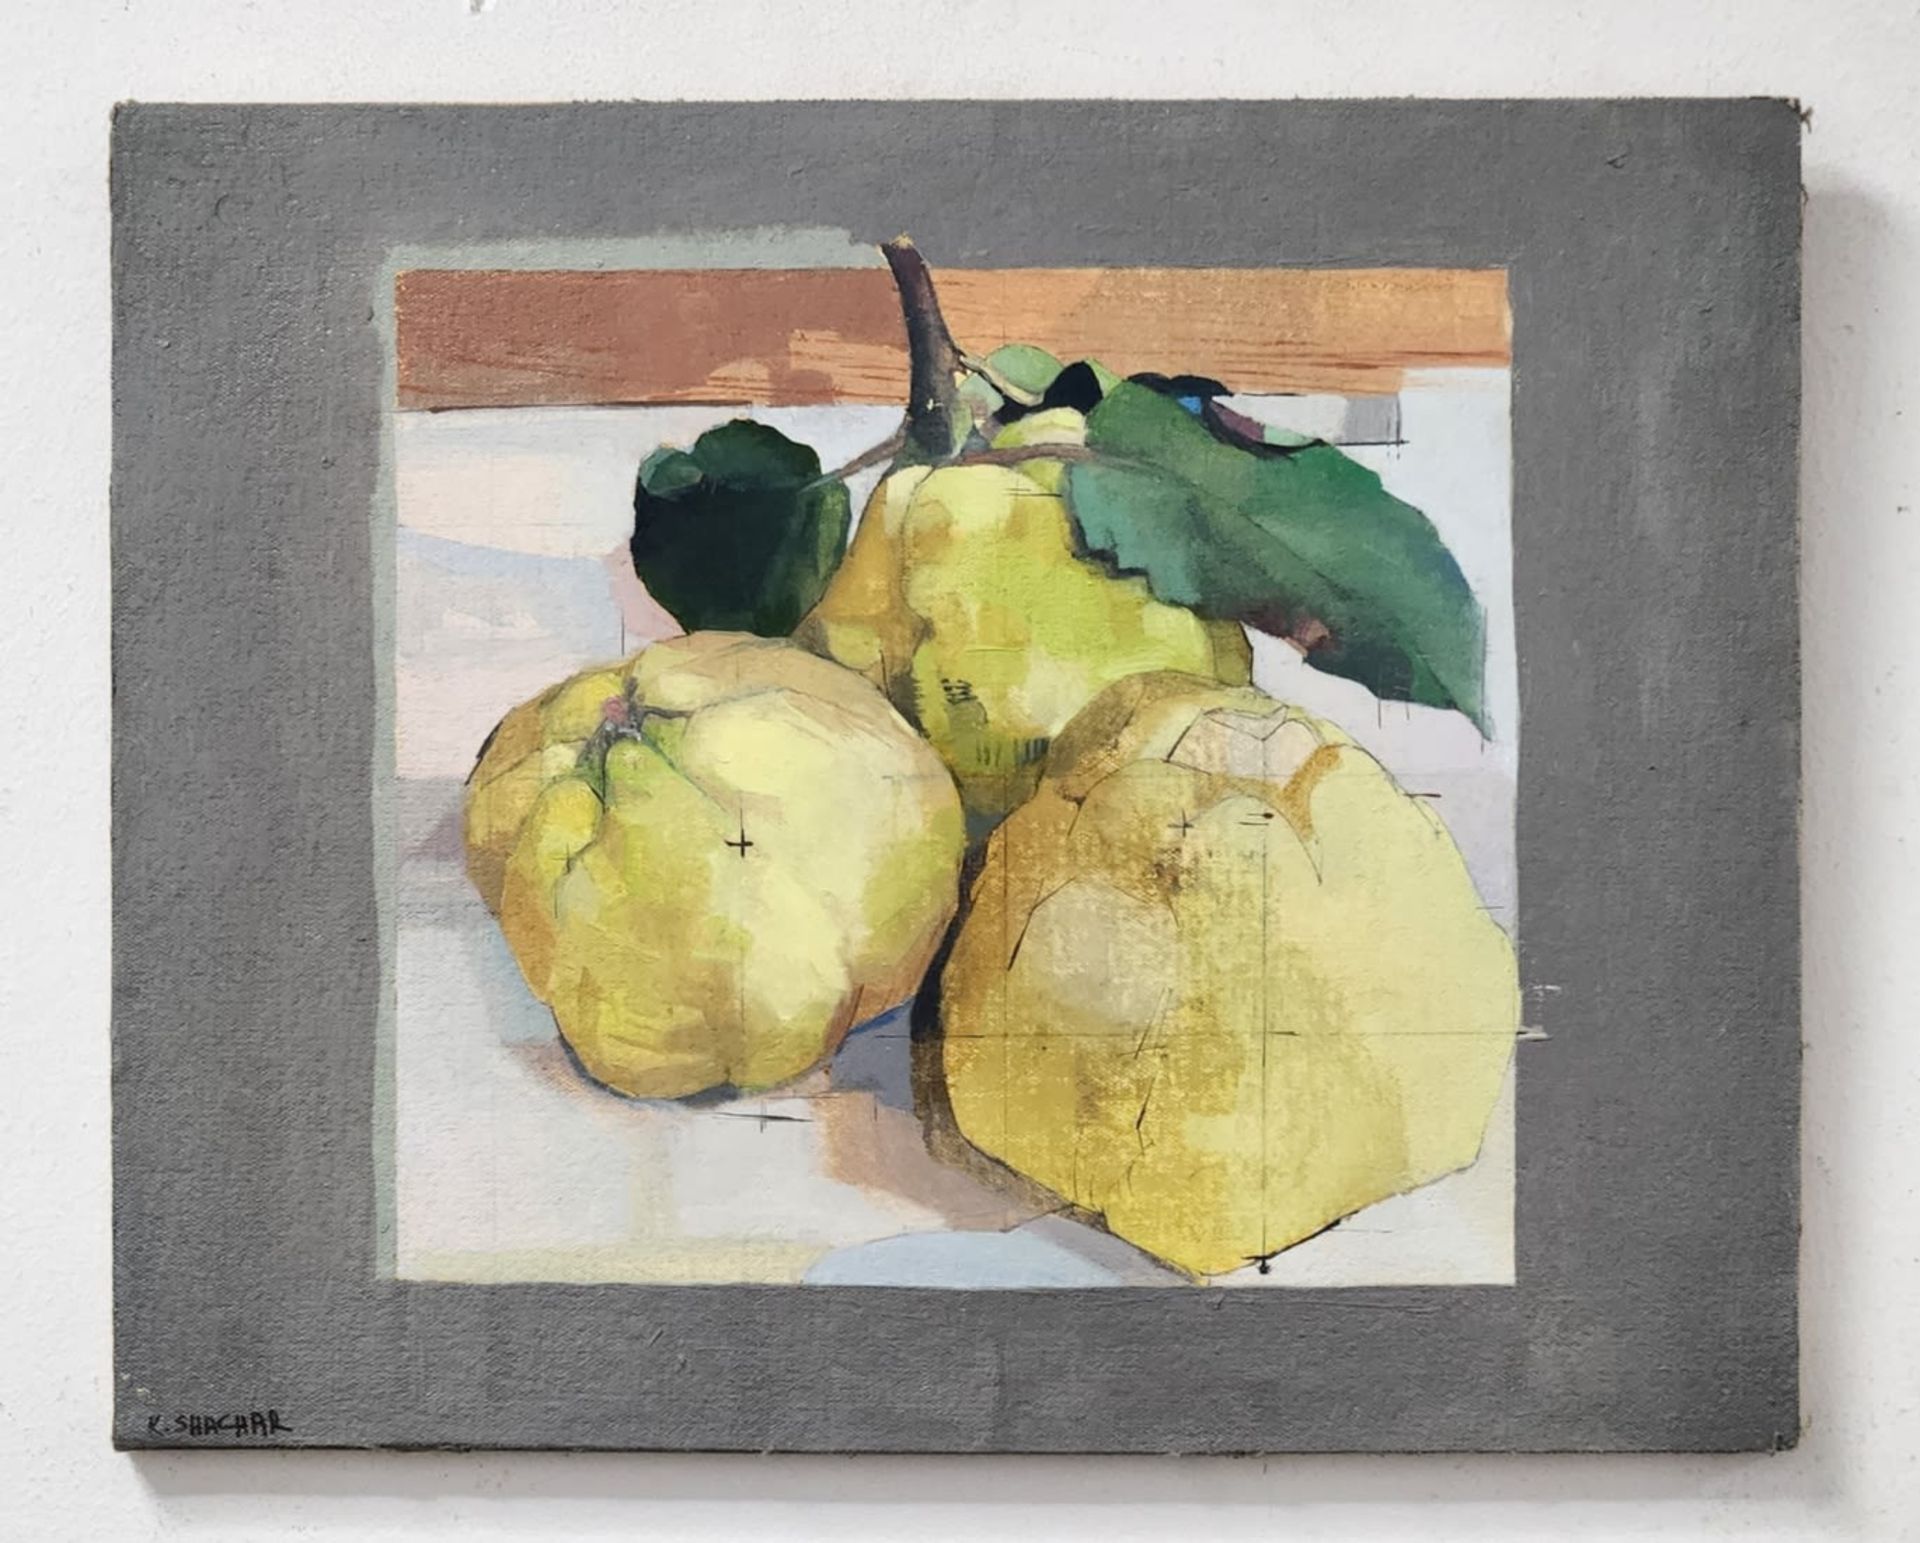 'Quince' - painting, kobi Shahar - oil on canvas attached to board, signed. Dimensions: 32x40 cm. - Image 2 of 3